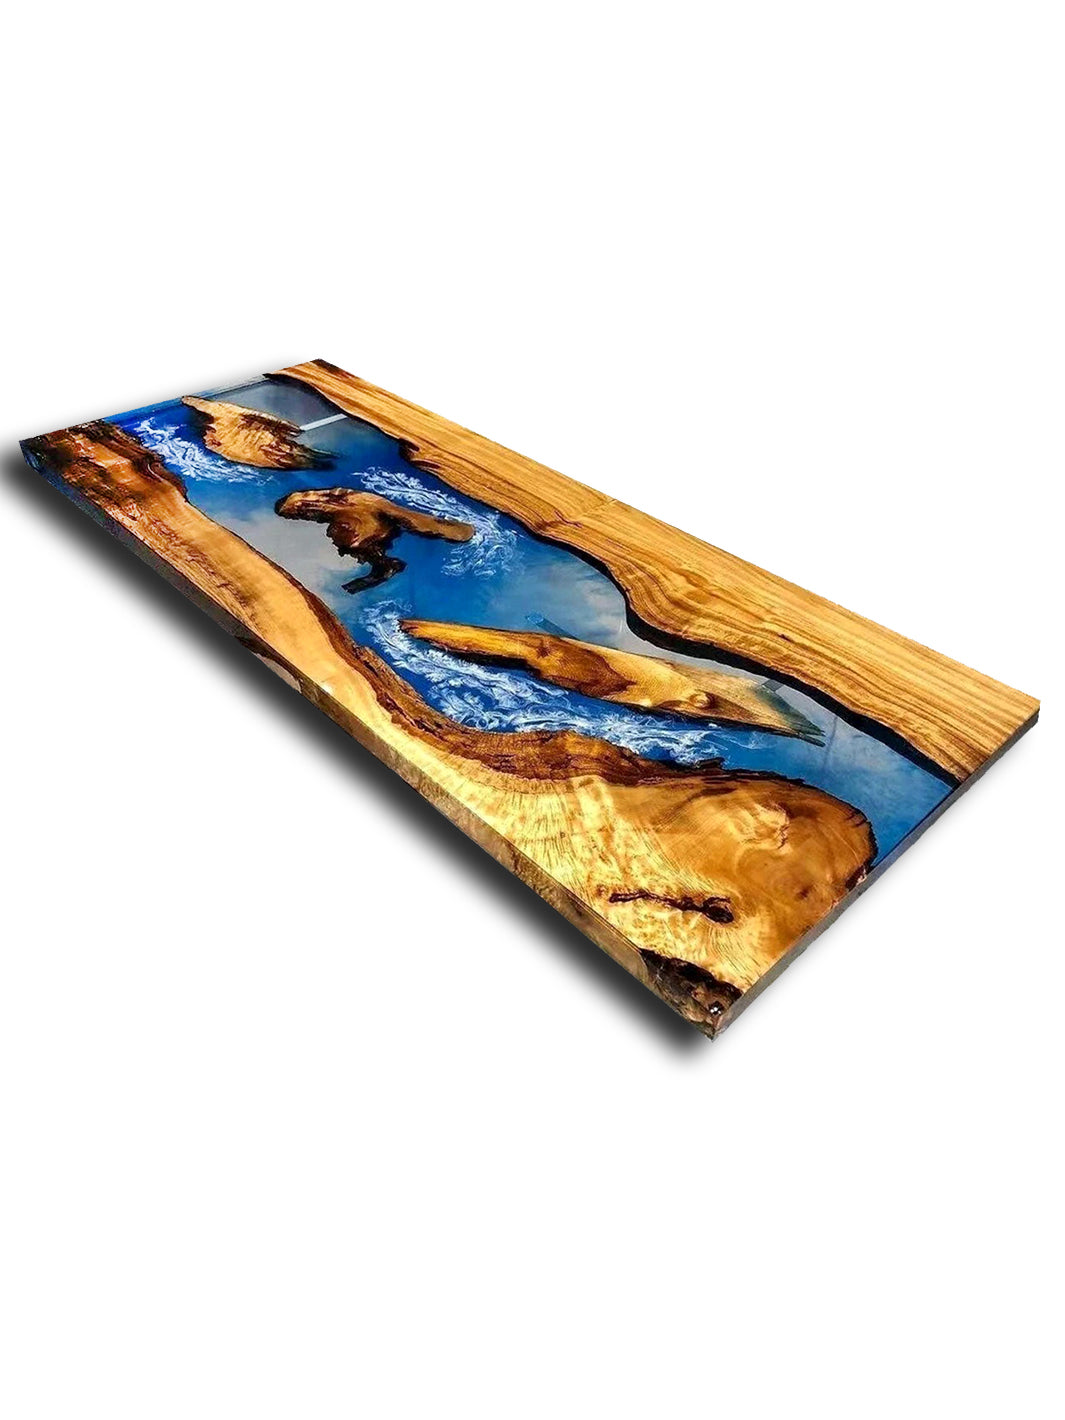 Handcrafted River Beach Epoxy Resin Wooden Coffee Table| 150x60cm Made 4 Decor Tables MDR0015-1